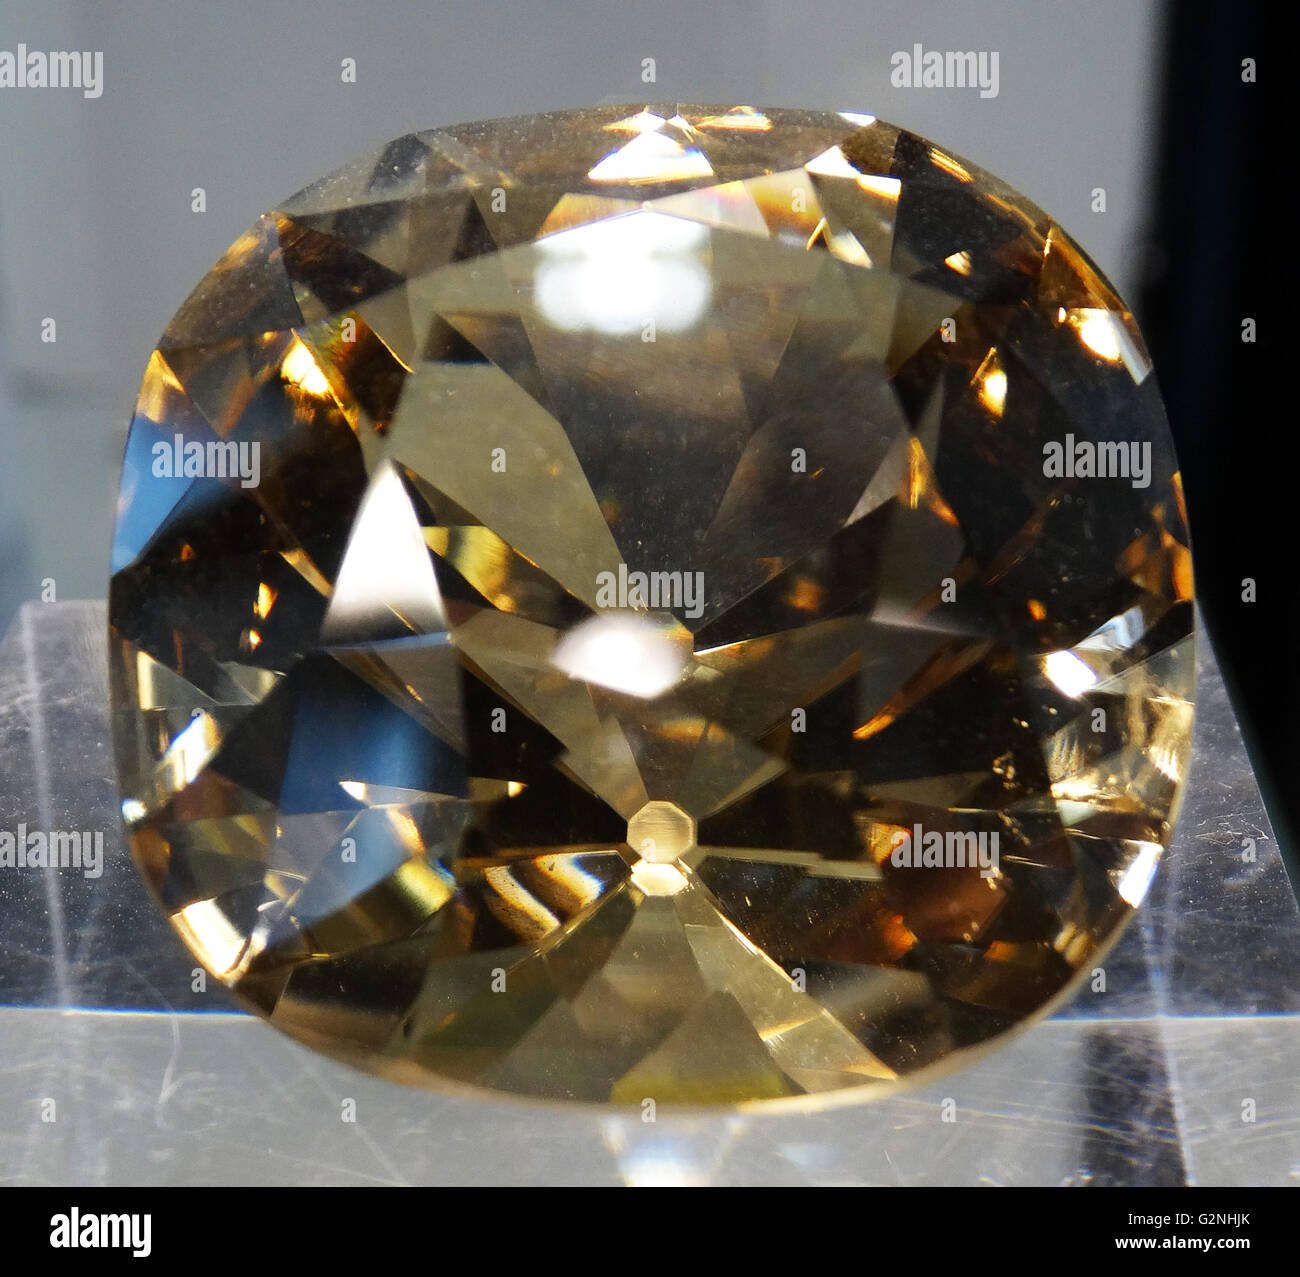 De Beers Yellow Diamond. De Beers is a cartel of companies that dominate the Diamond industry. The company was founded in 1888 by British businessman Cecil Rhodes, financed by the South African diamond magnate Alfred Beit and the London-based N M Rothschild & Sons bank. Dated 2014 Stock Photo